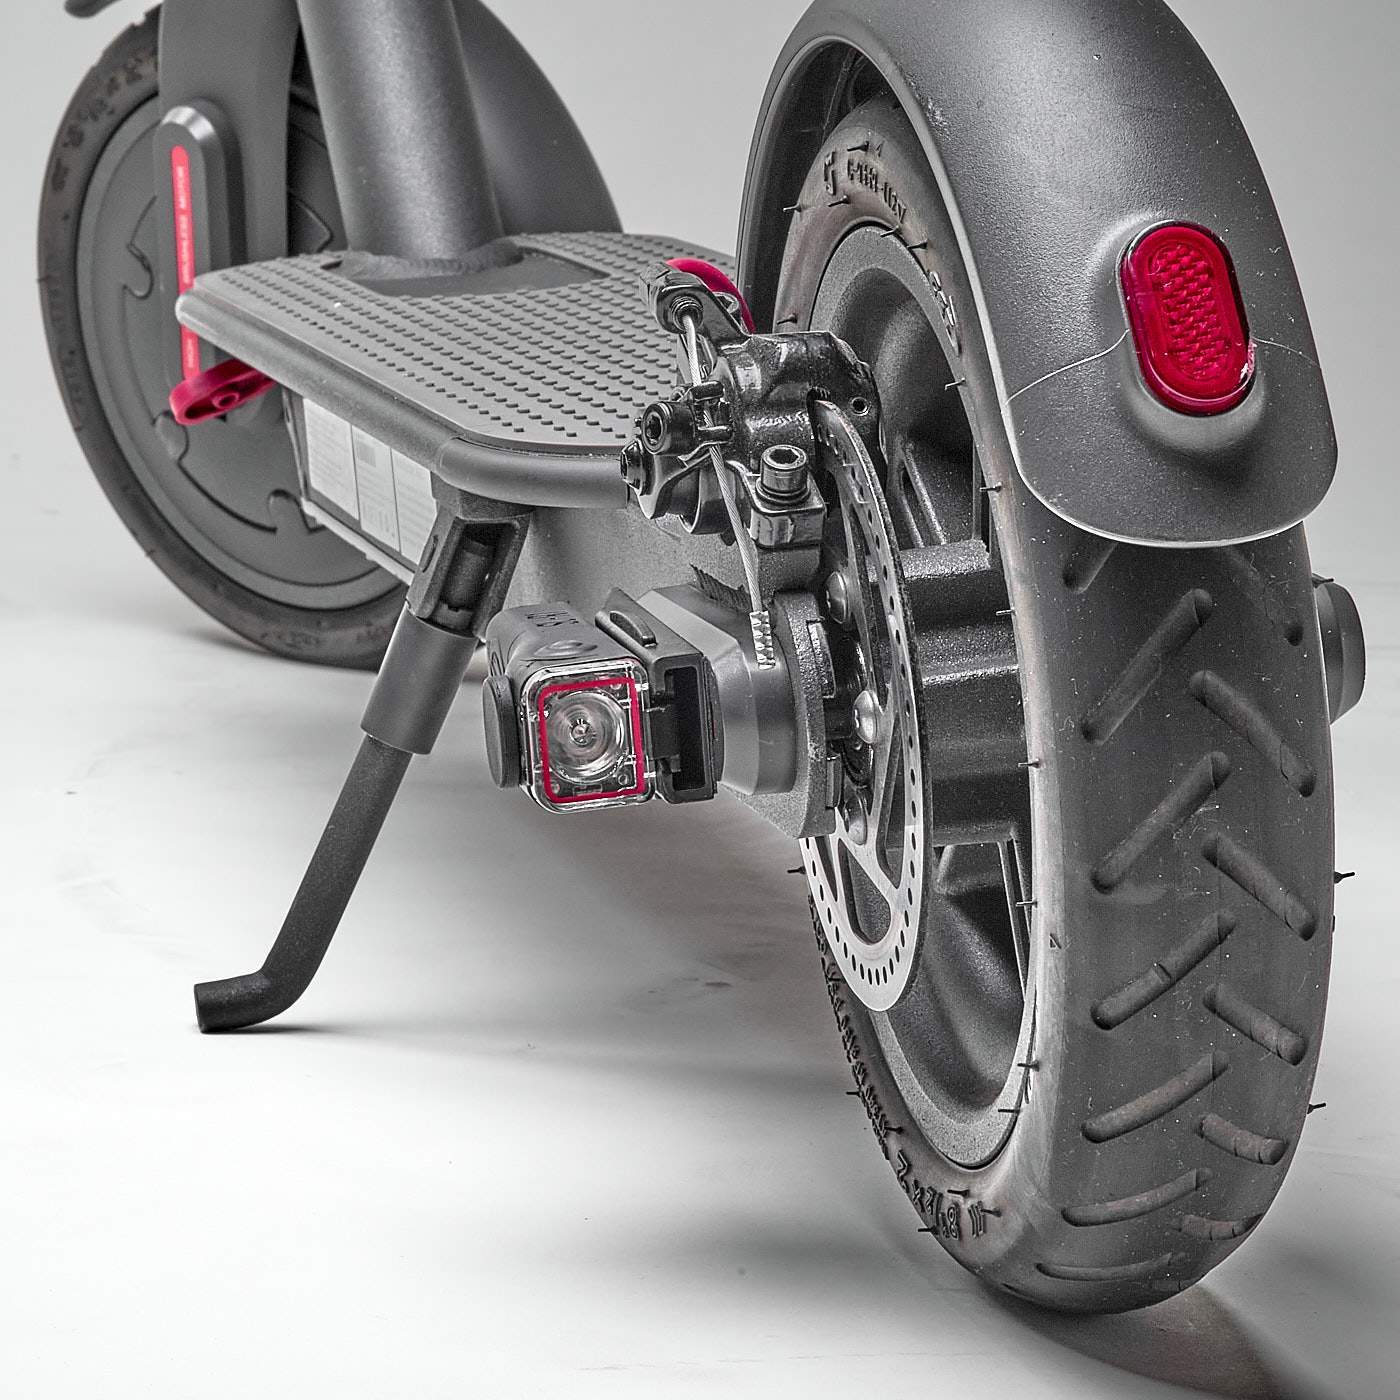 SL-300/R1 Scooter Combo Pack